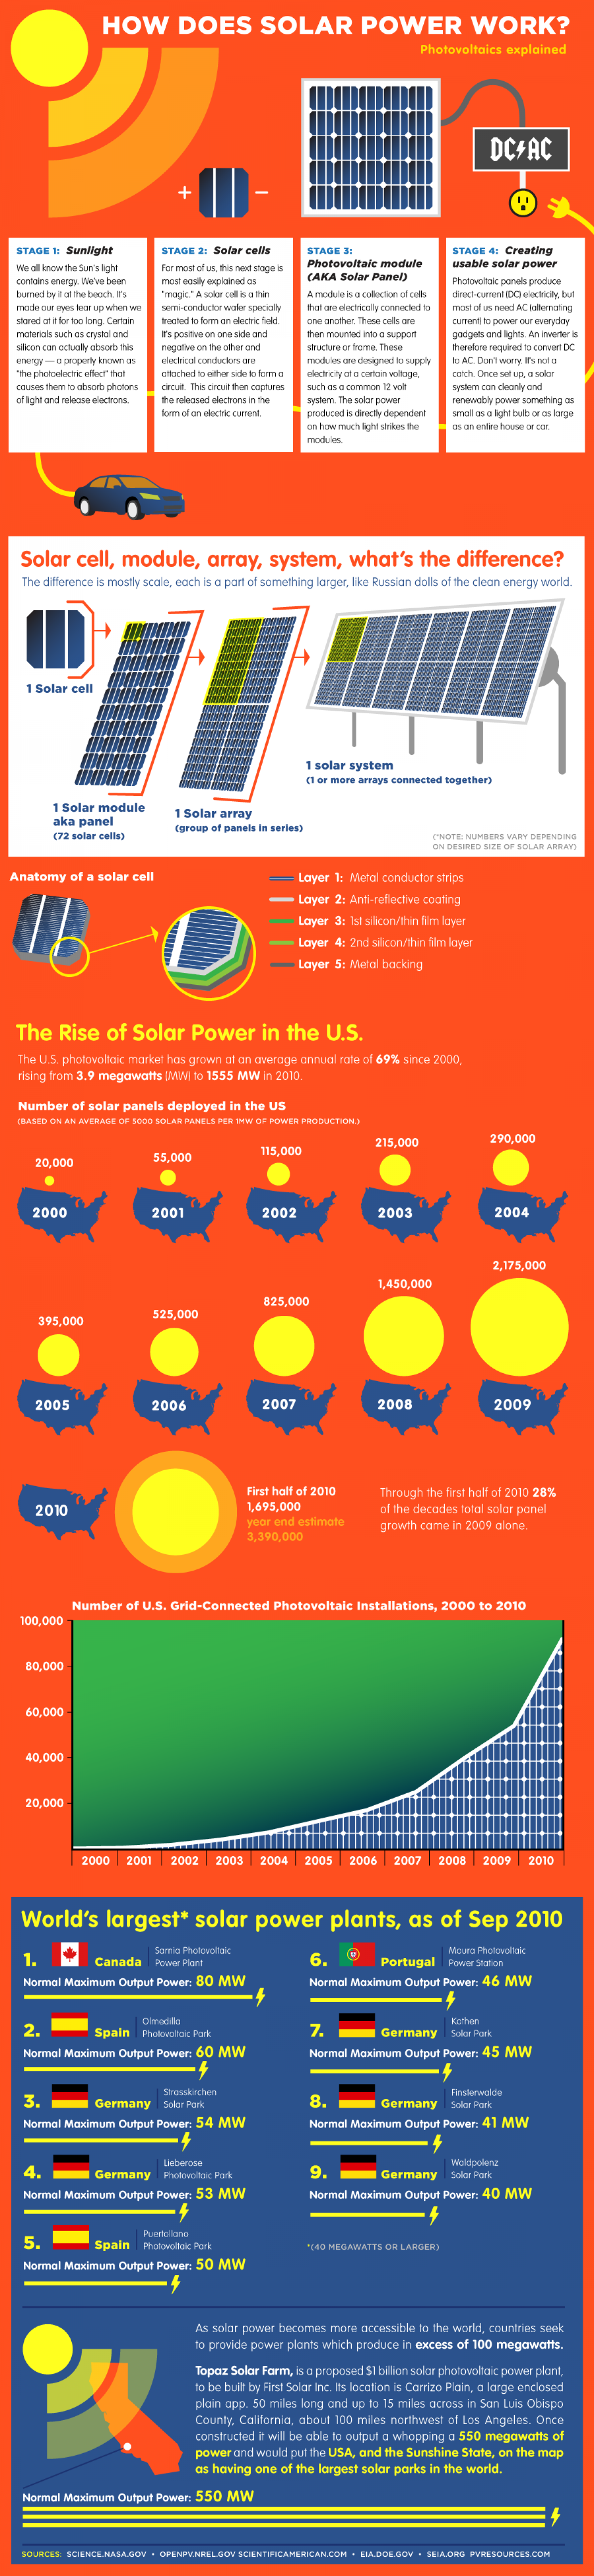 How Does Solar Power Work? - Photovoltaics Explained Infographic